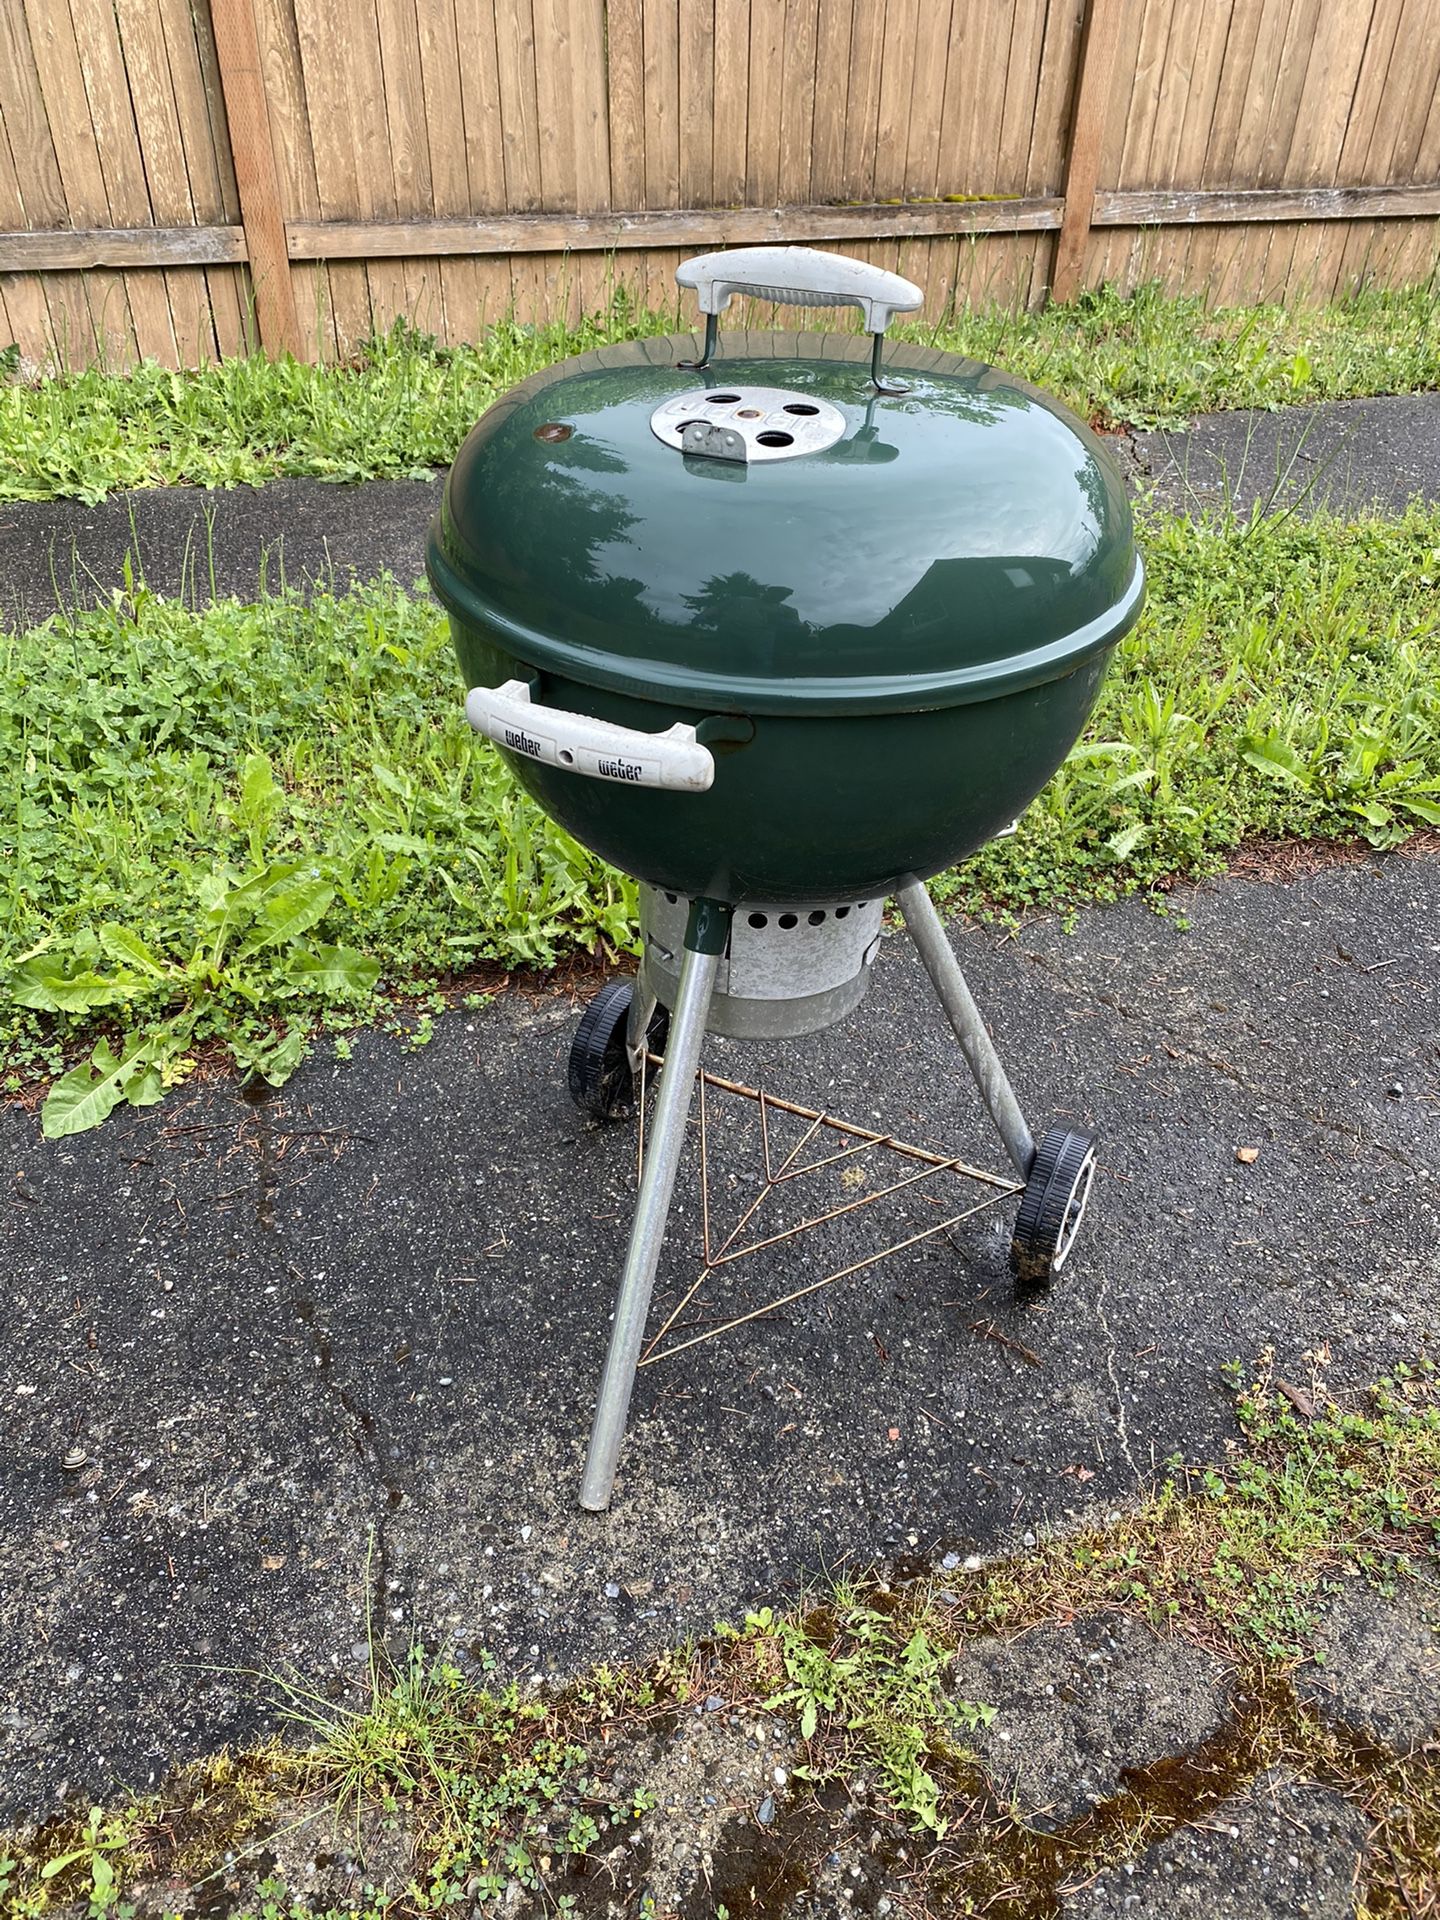 Green Weber 18” Charcoal Bbq Grill With One Touch Cleaning System